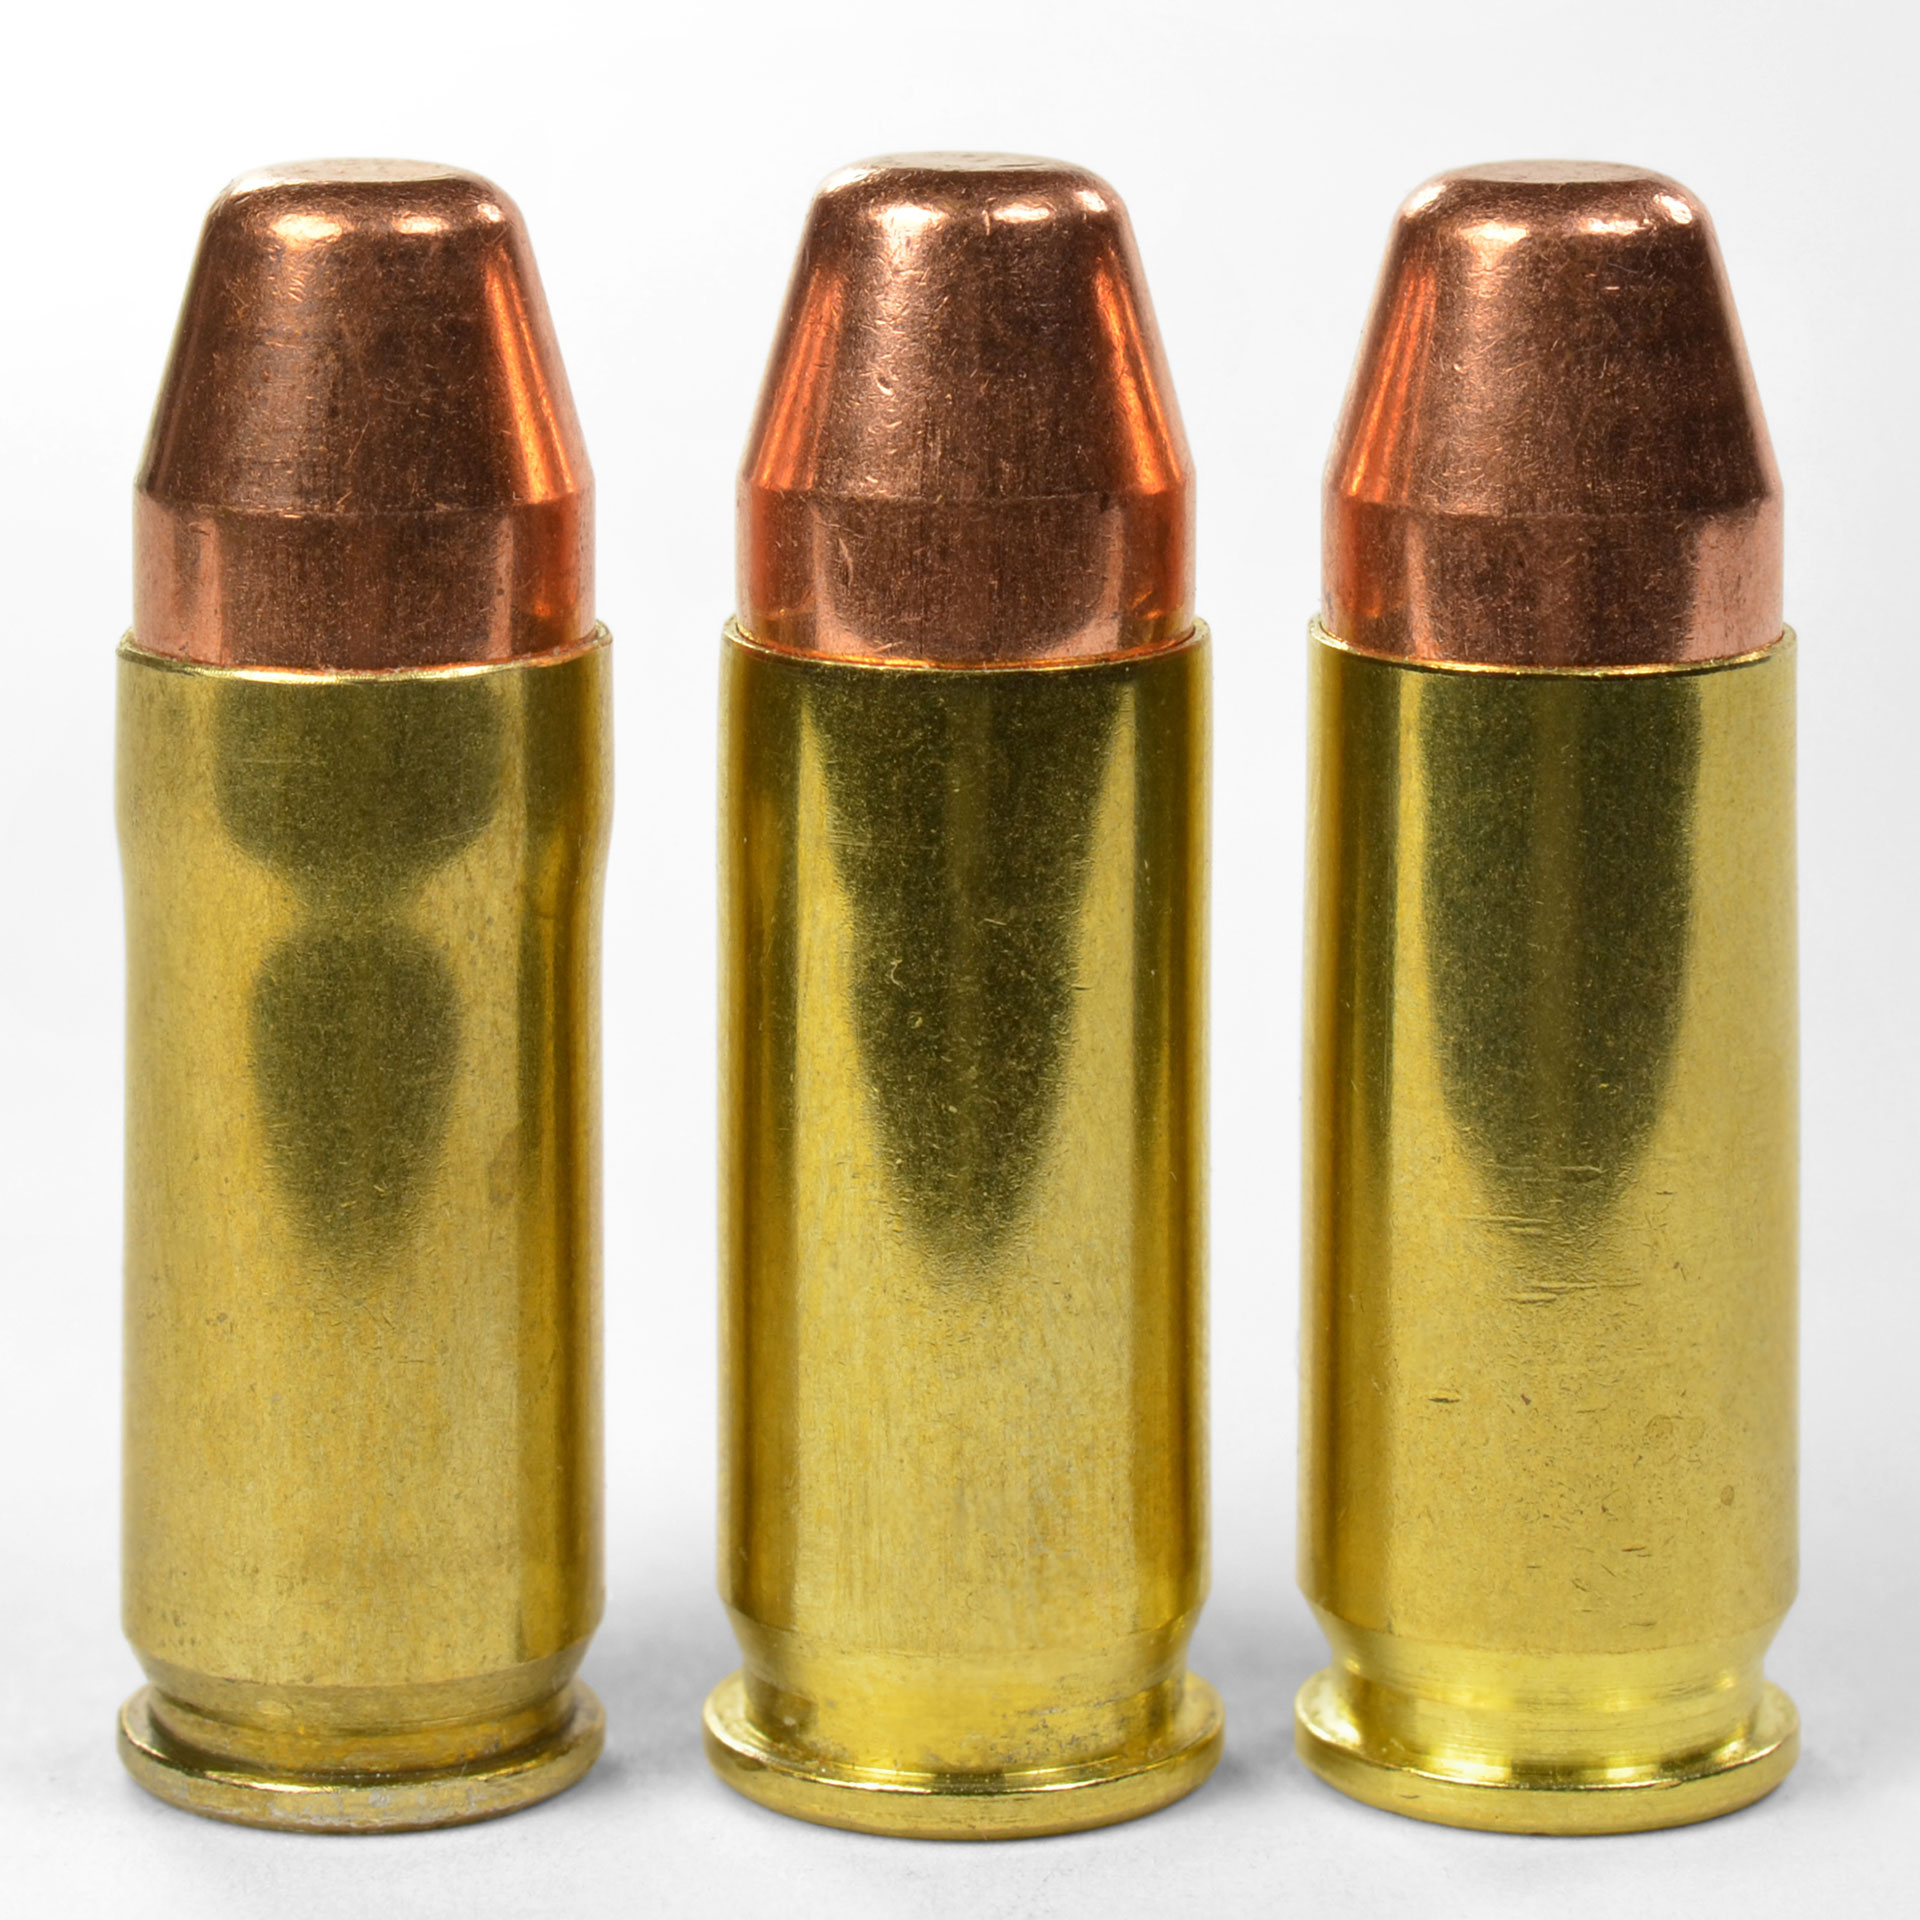 Ammunition comparison (from the left) of a Super Cooper, .38 Super and 9X23 mm Winchester. it’s hard to tell them apart except for the unusual shape of the Super Cooper.